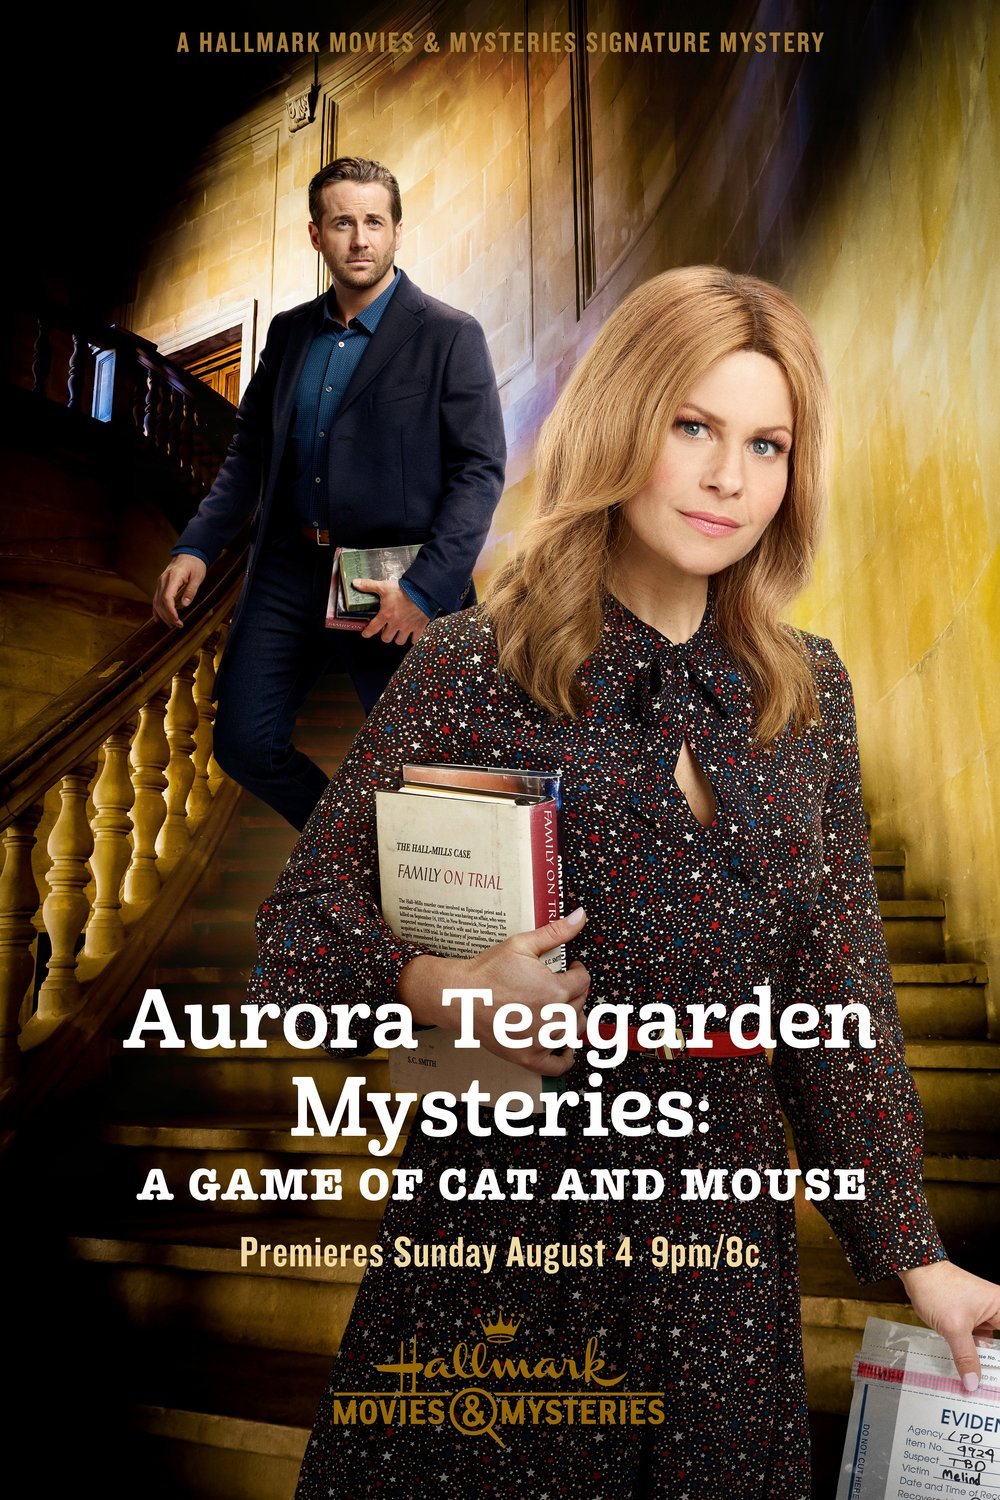 L'affiche du film Aurora Teagarden Mysteries: A Game of Cat and Mouse